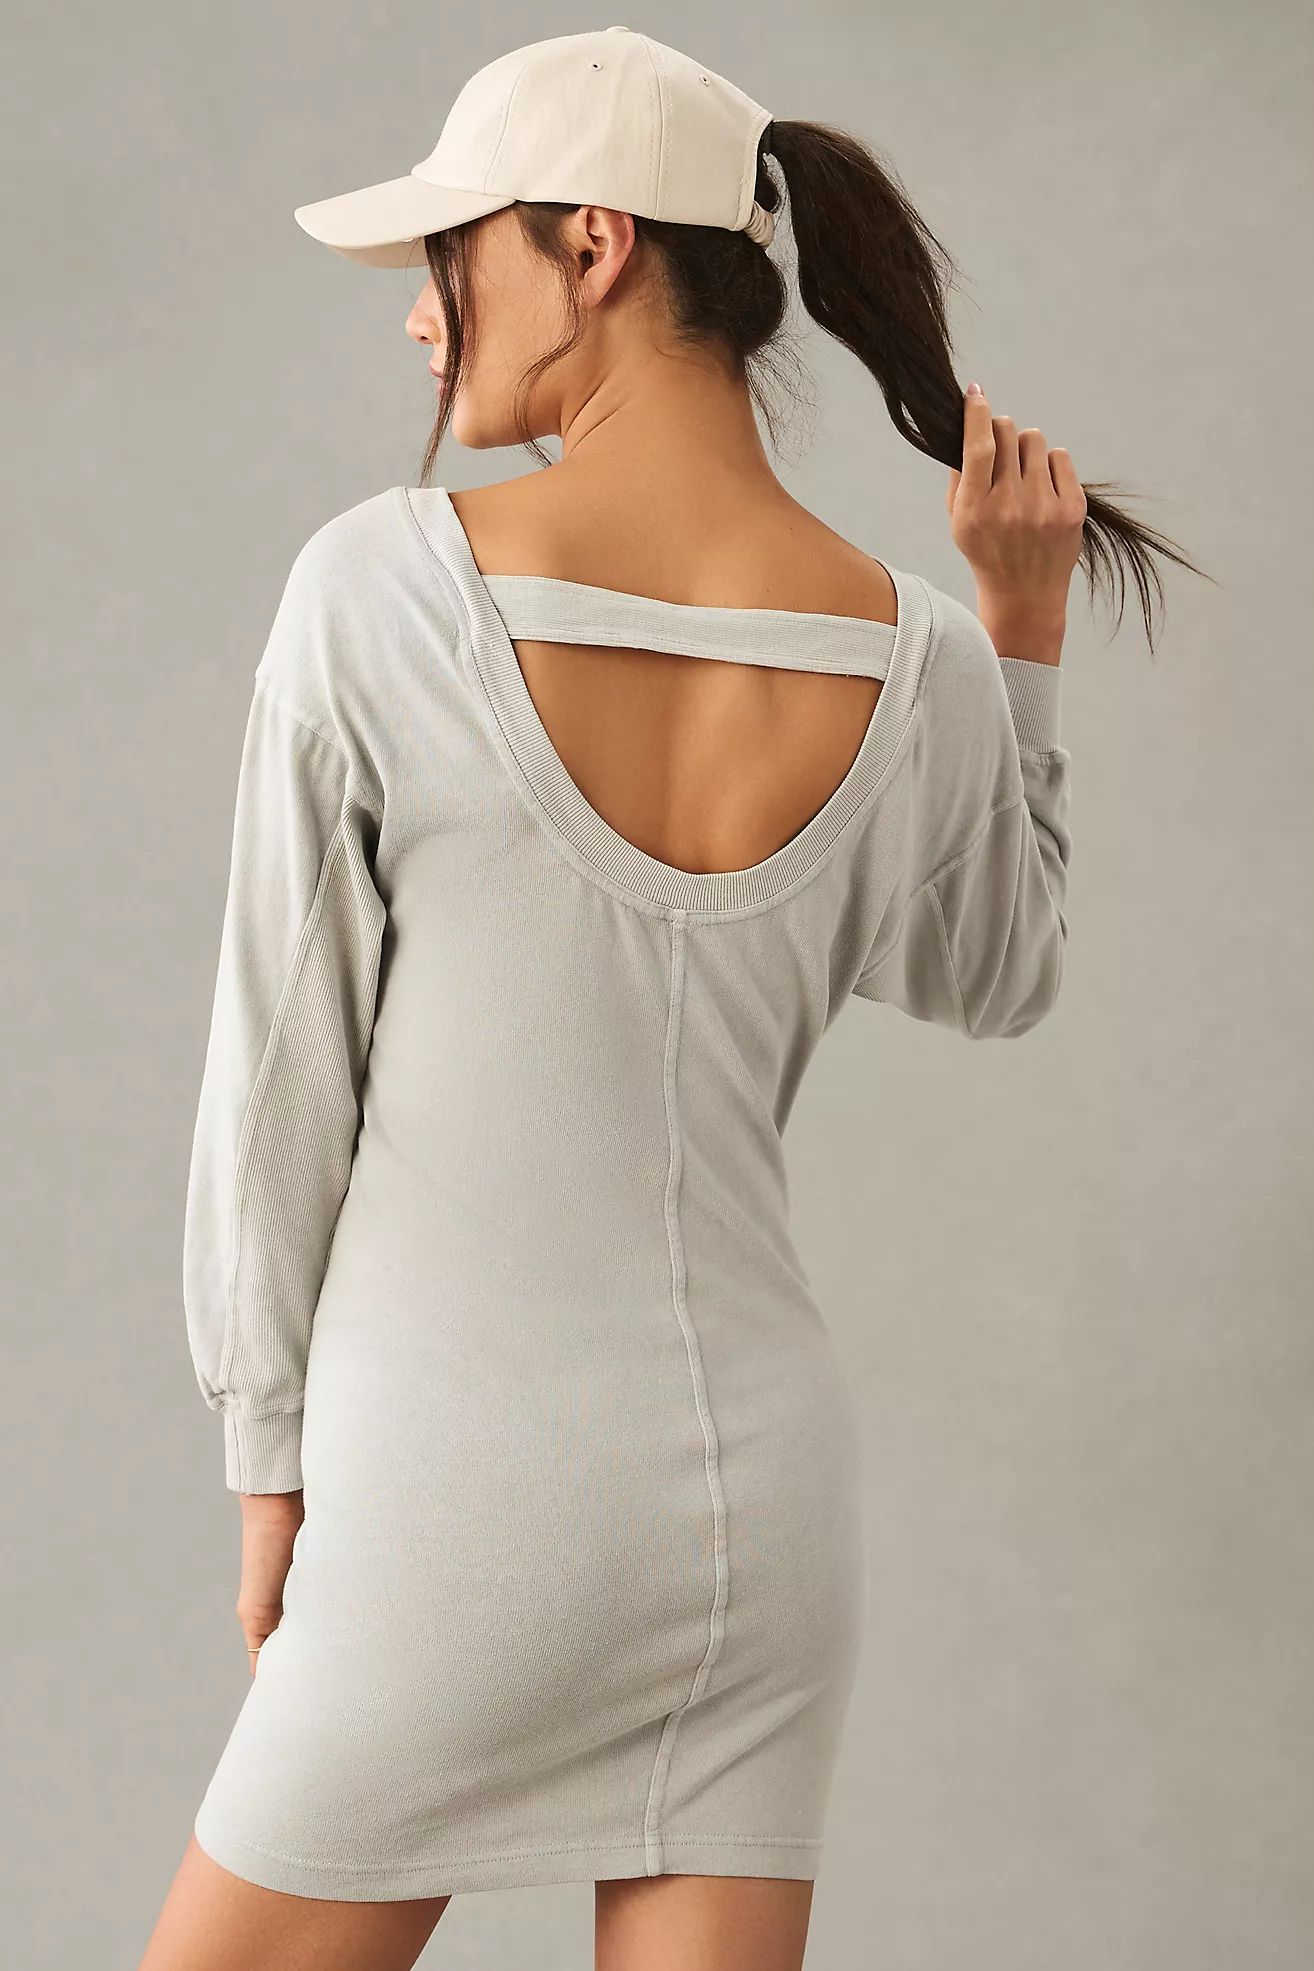 Daily Practice by Anthropologie Darla Long-Sleeve Open-Back Dress | Anthropologie (US)